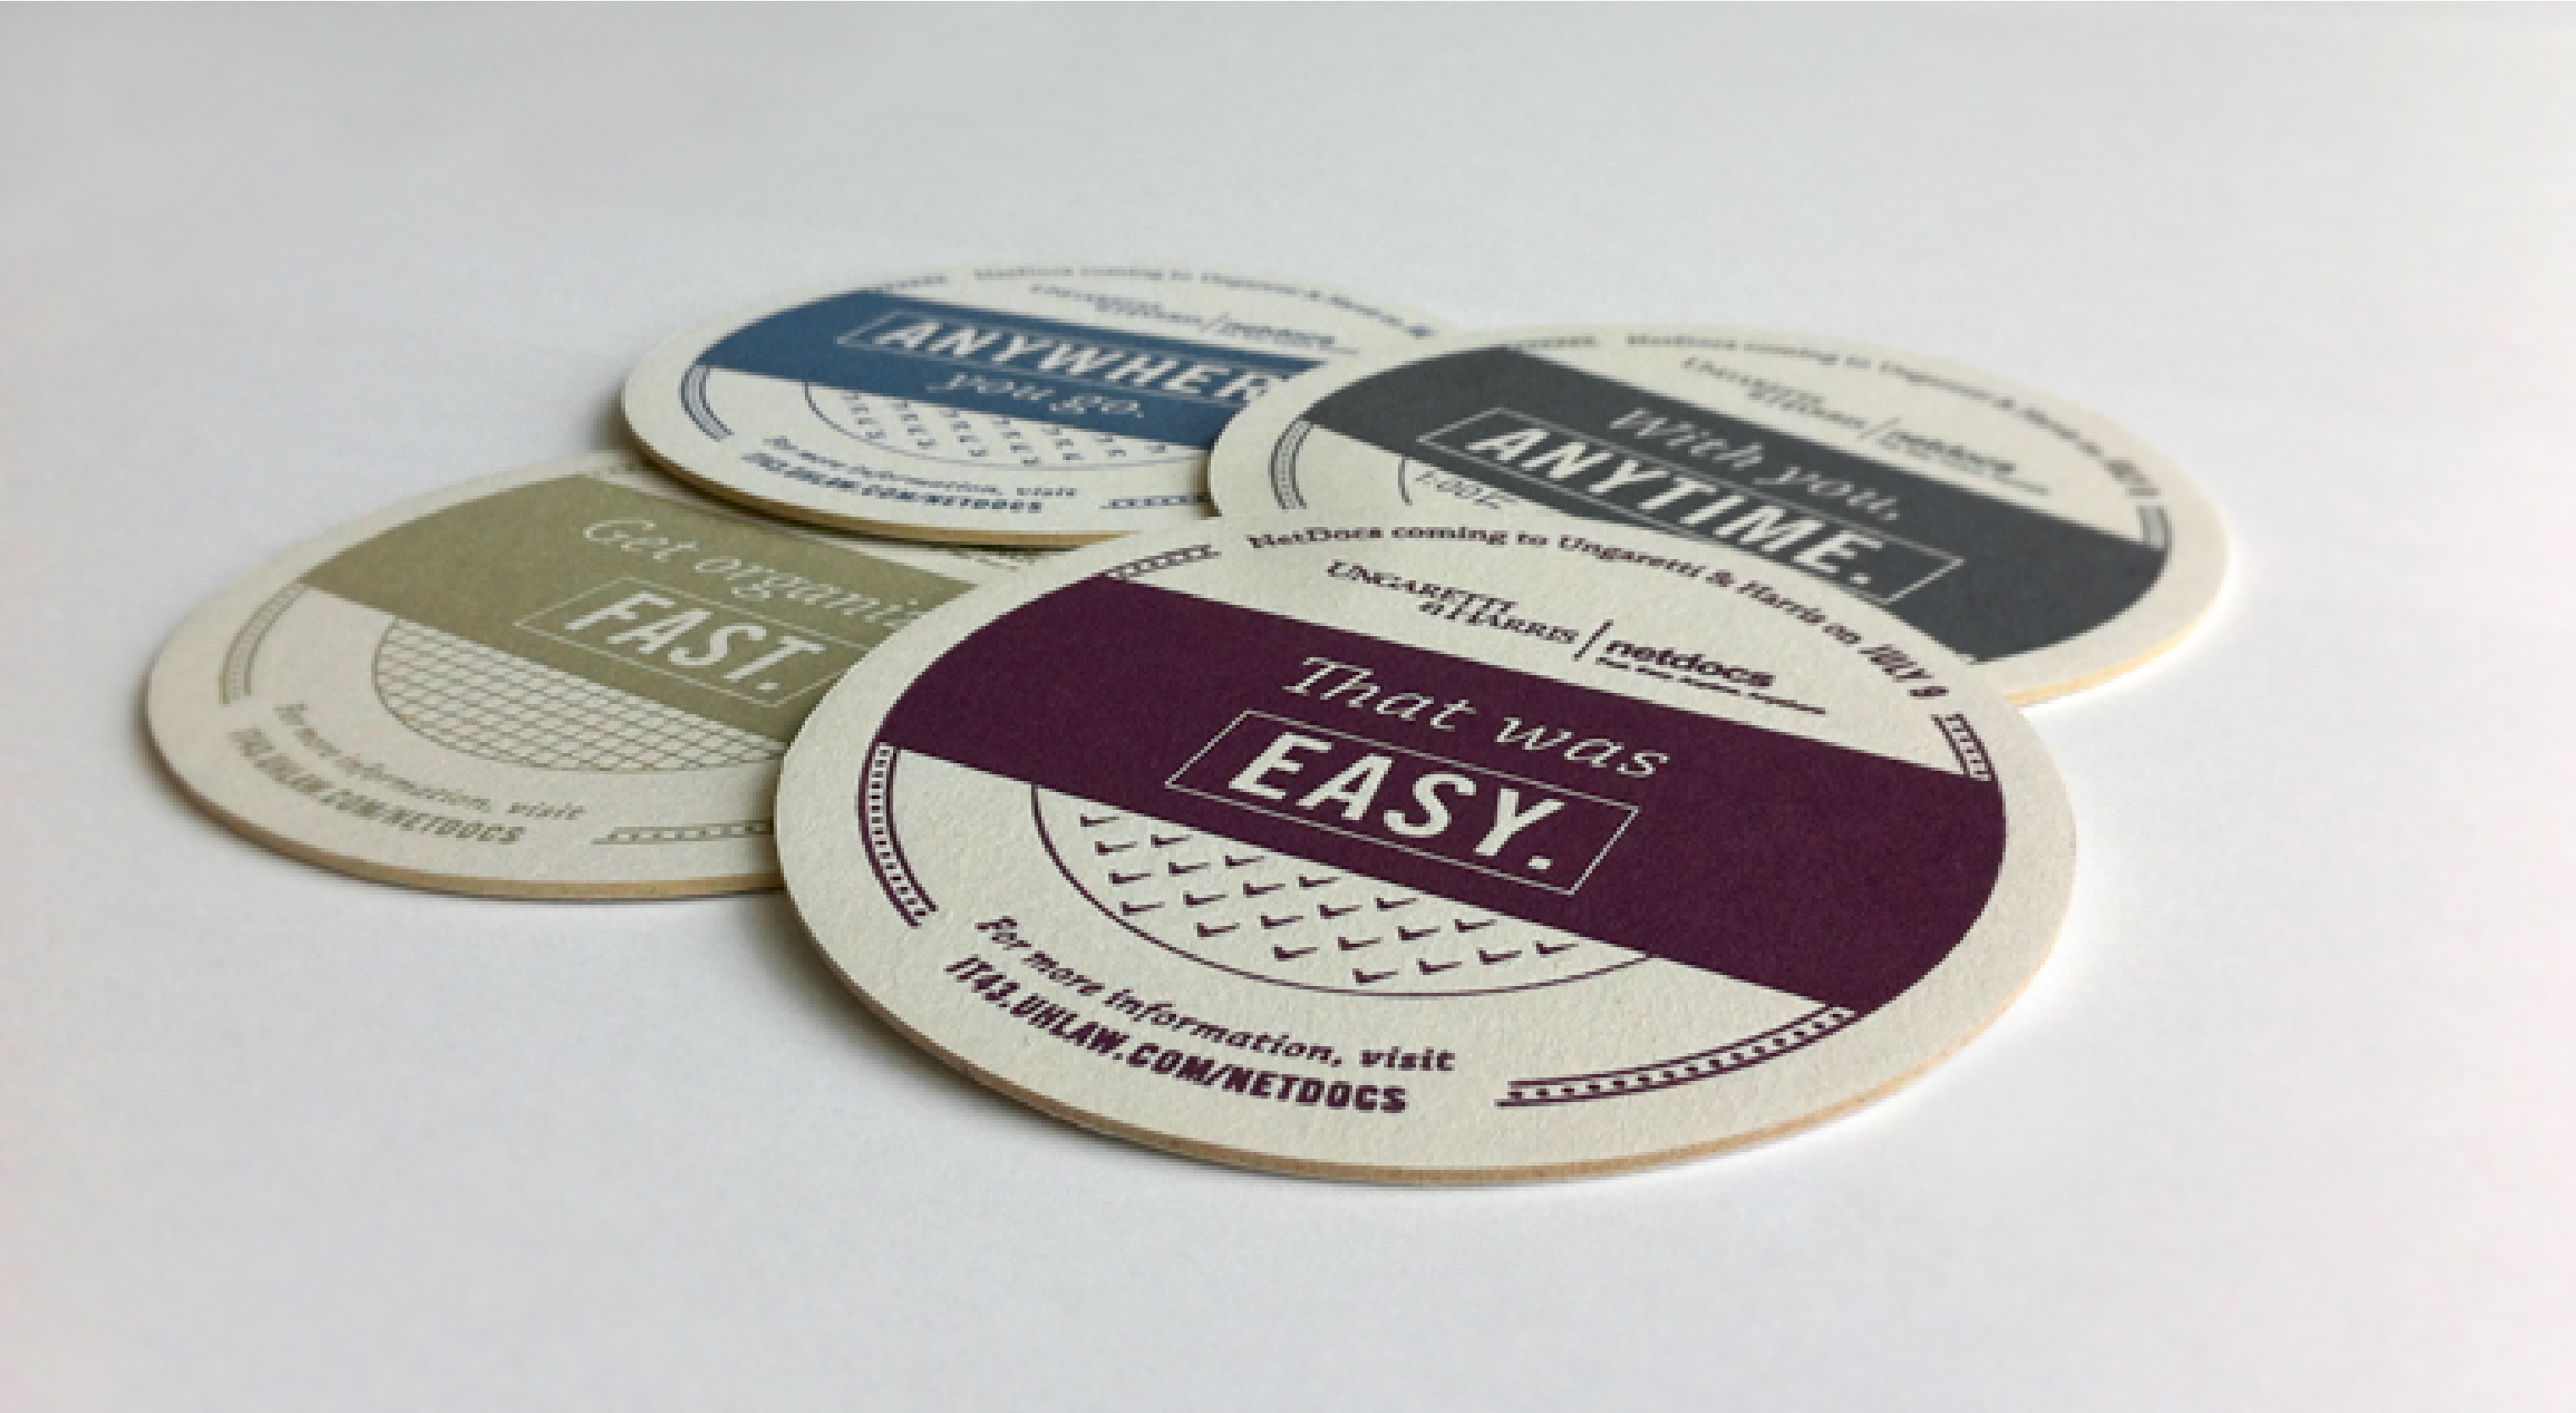 IT43 coasters that read "That was easy"